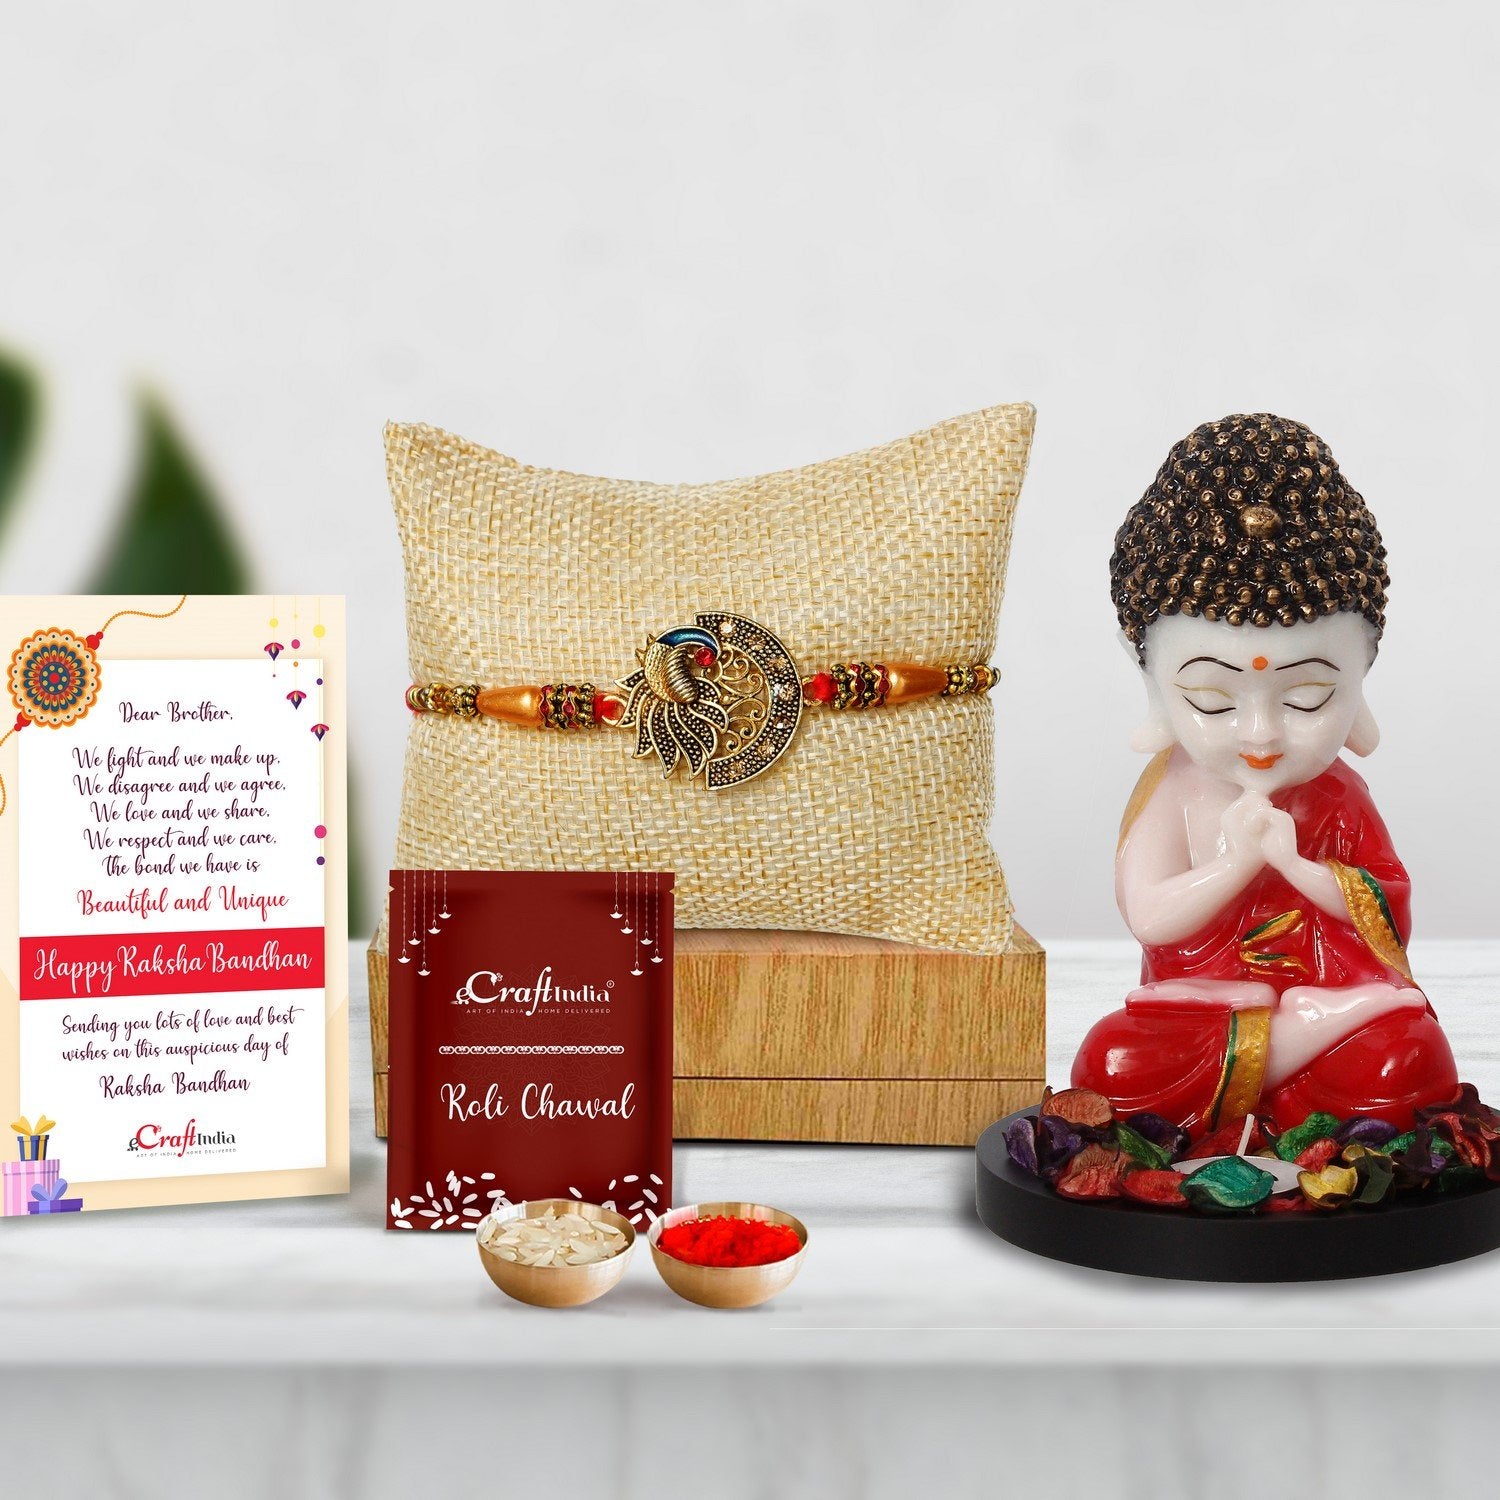 Designer Peacock Rakhi with Praying Red Monk Buddha with Wooden Base, Fragranced Petals and Tealight and Roli Chawal Pack, Best Wishes Greeting Card